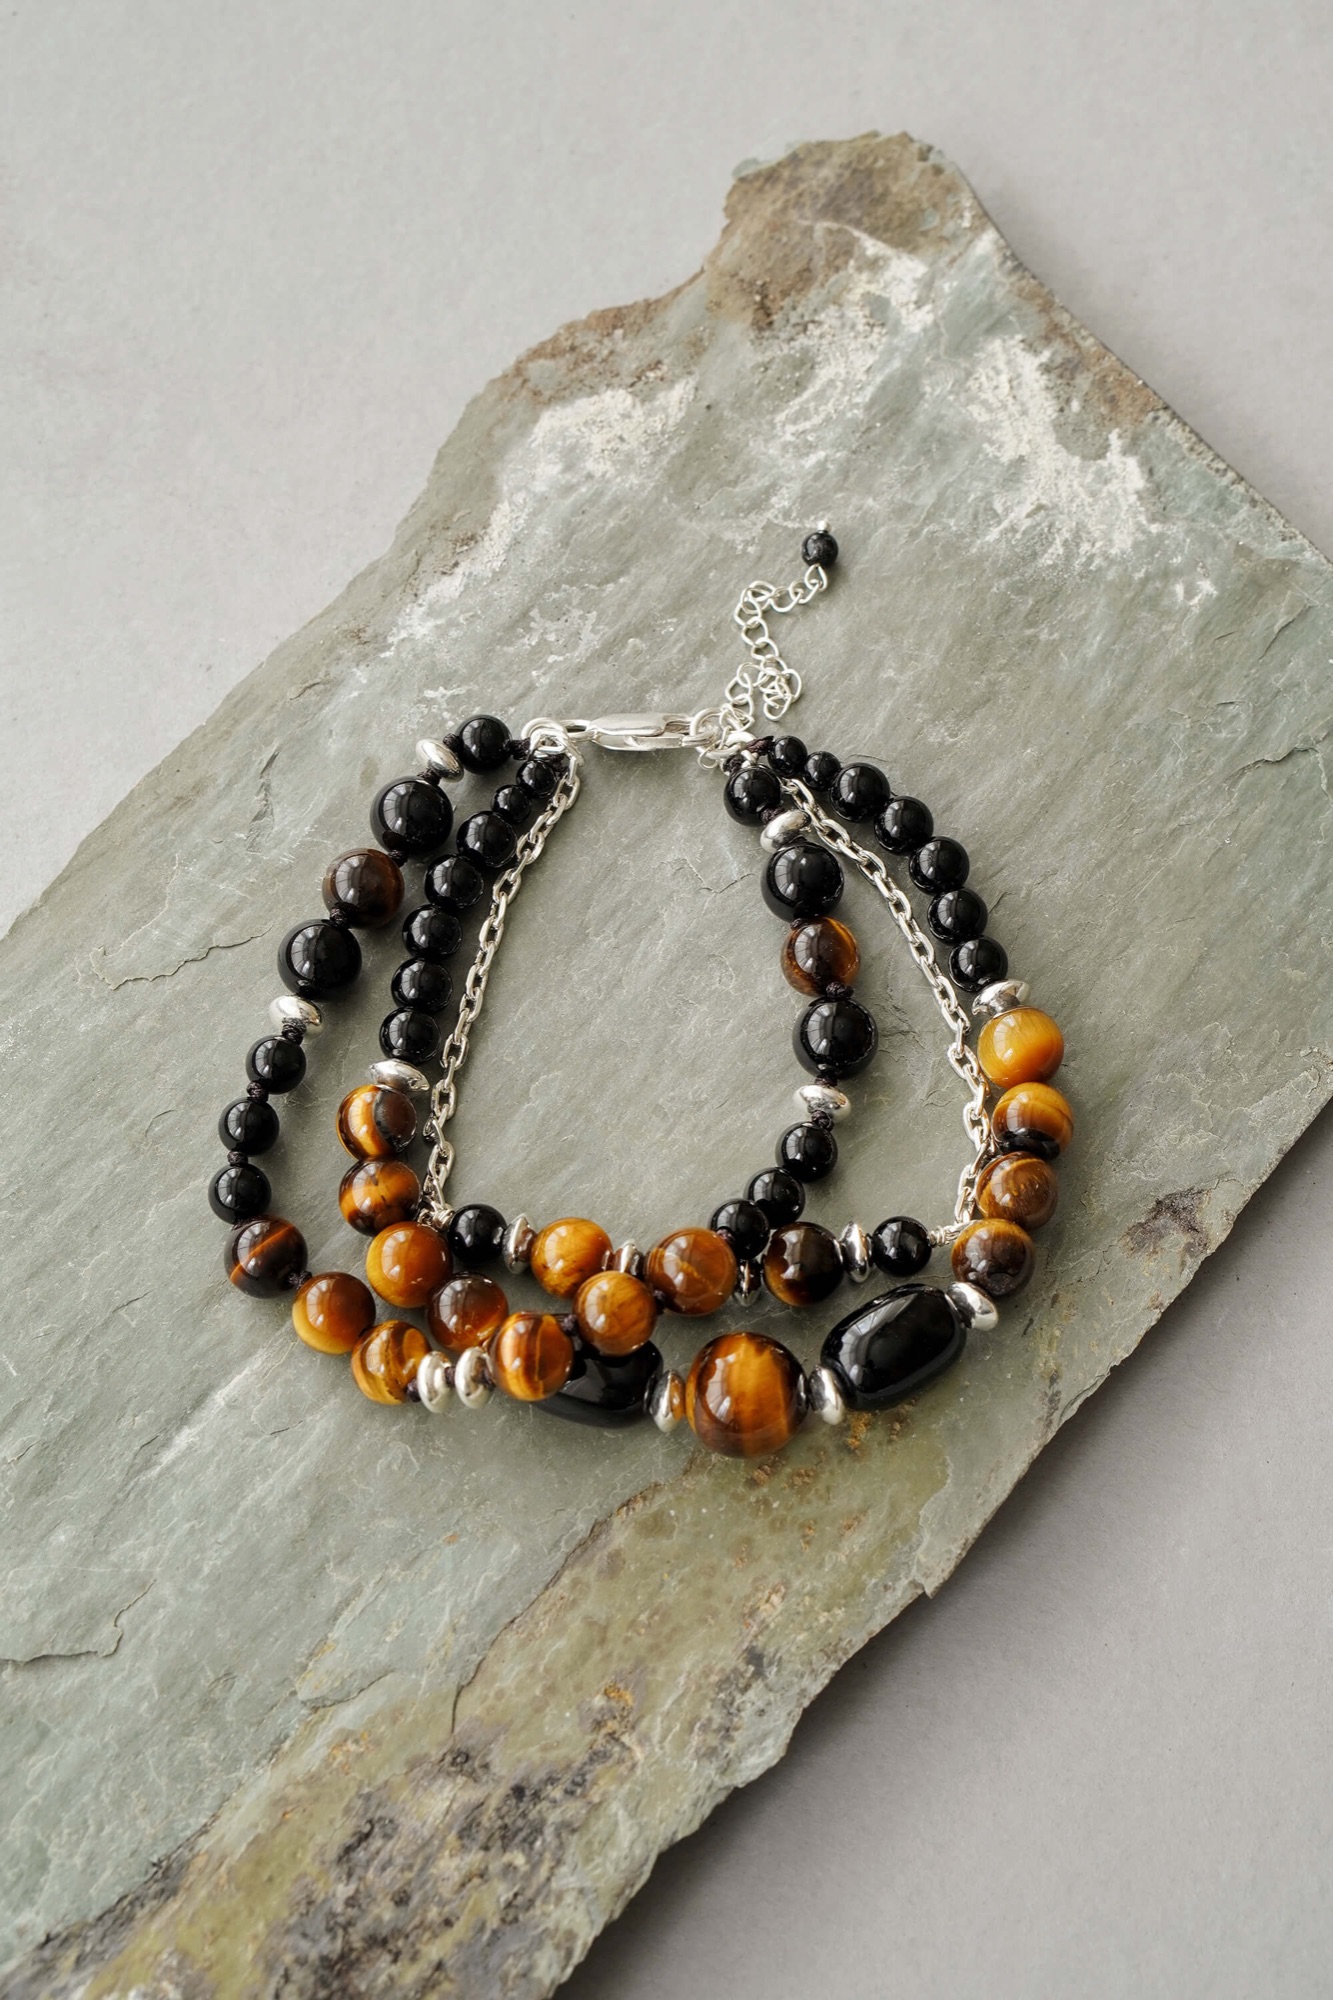 Mens 925 Sterling Silver Tiger's Eye and Black Onyx Layer Bracelet by Xander Kostroma